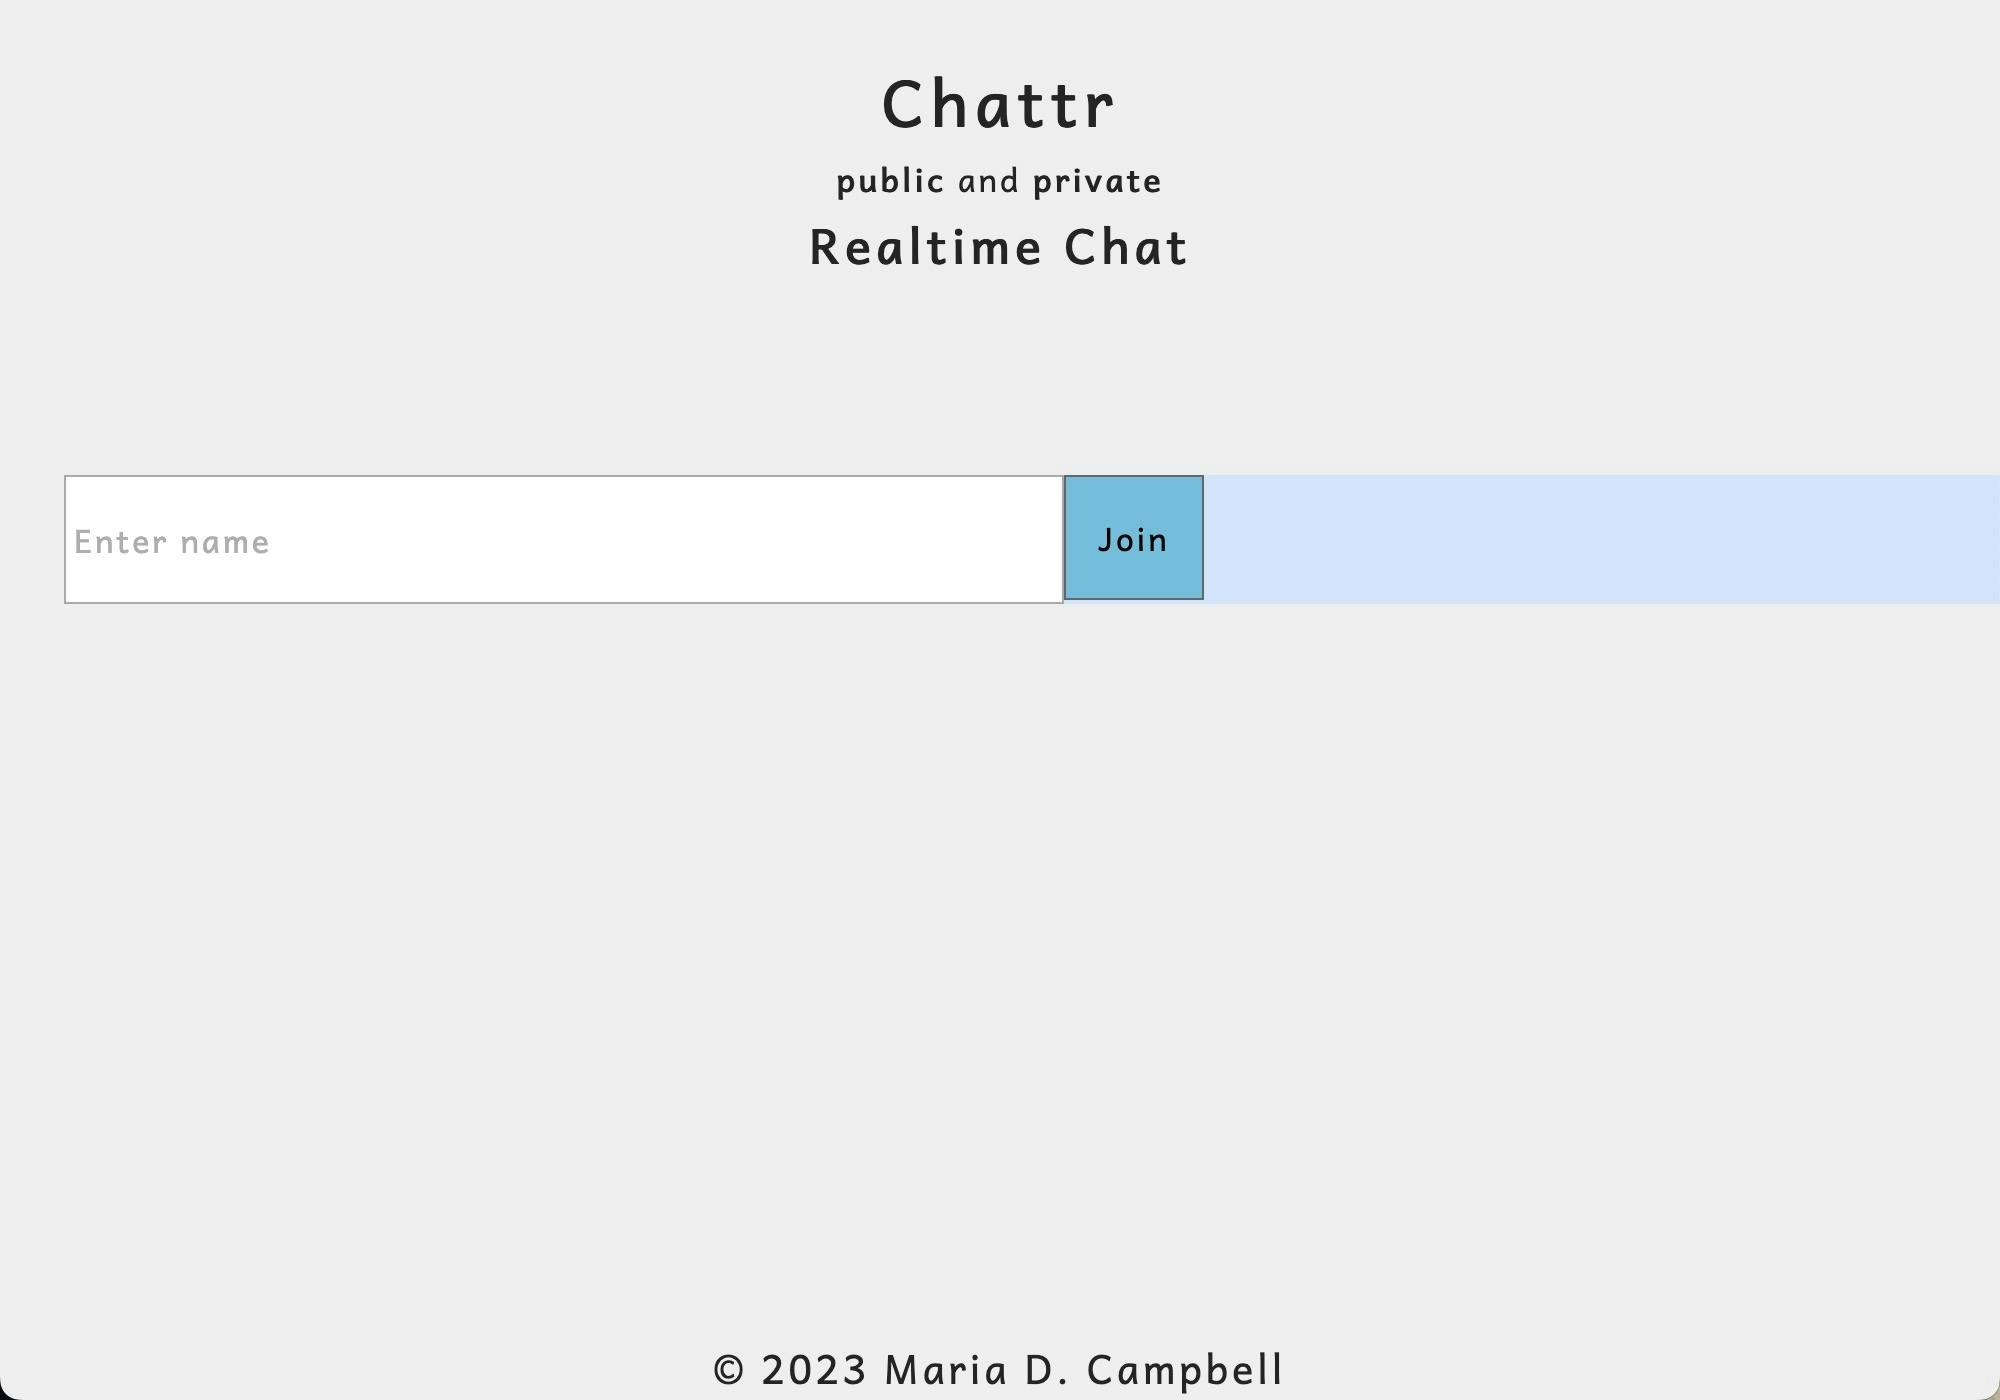 Chattr public and private realtime chat